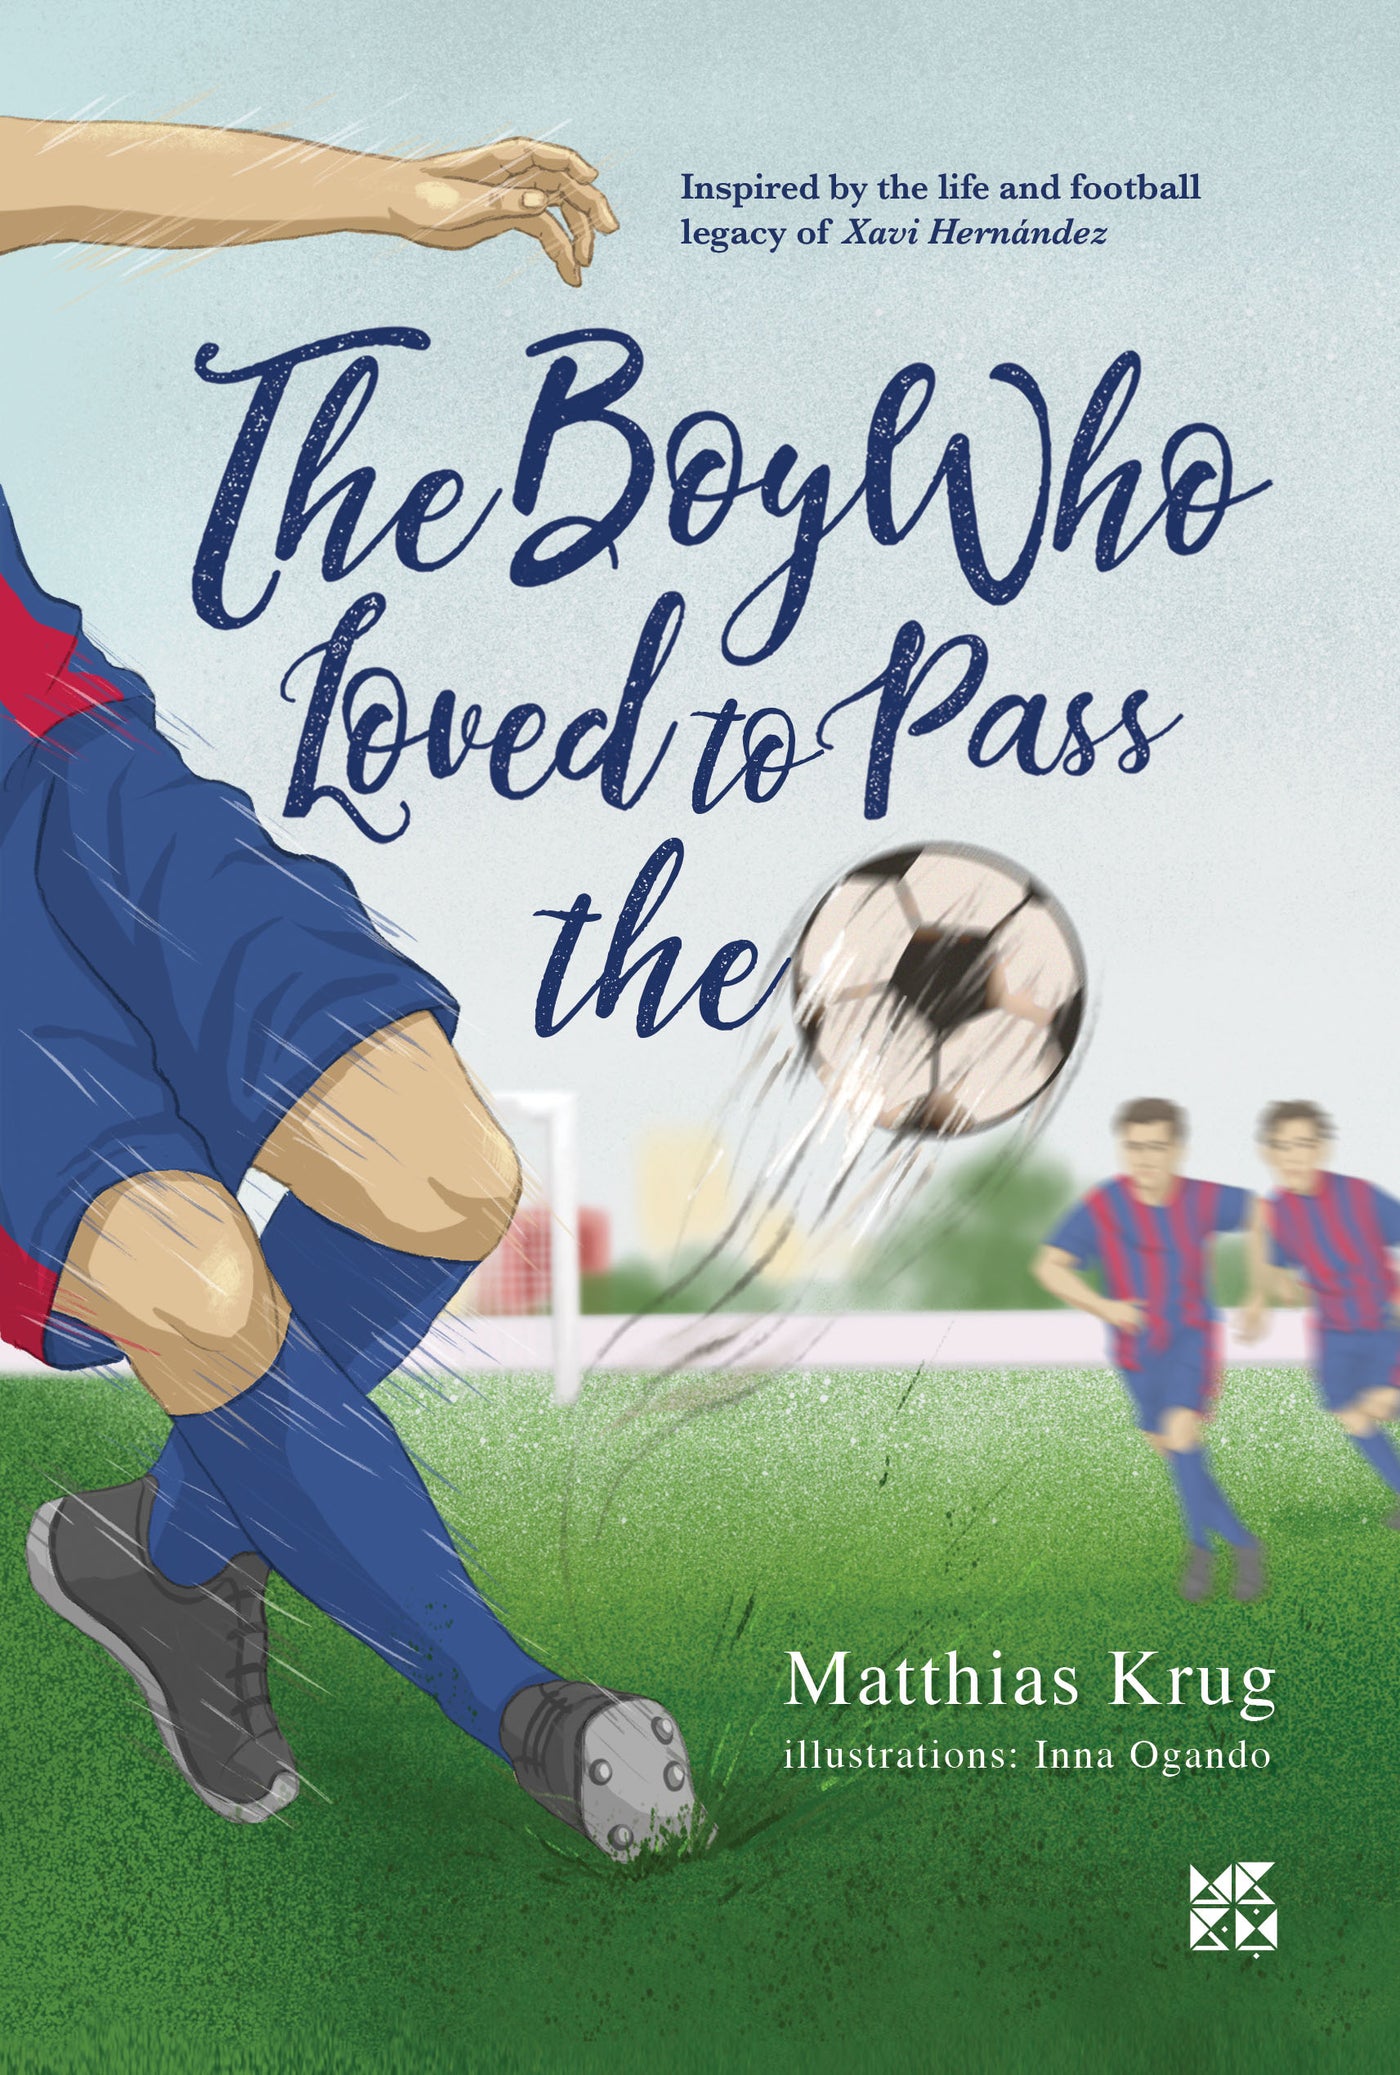 The Boy Who Loved to Pass the Ball Book Cover